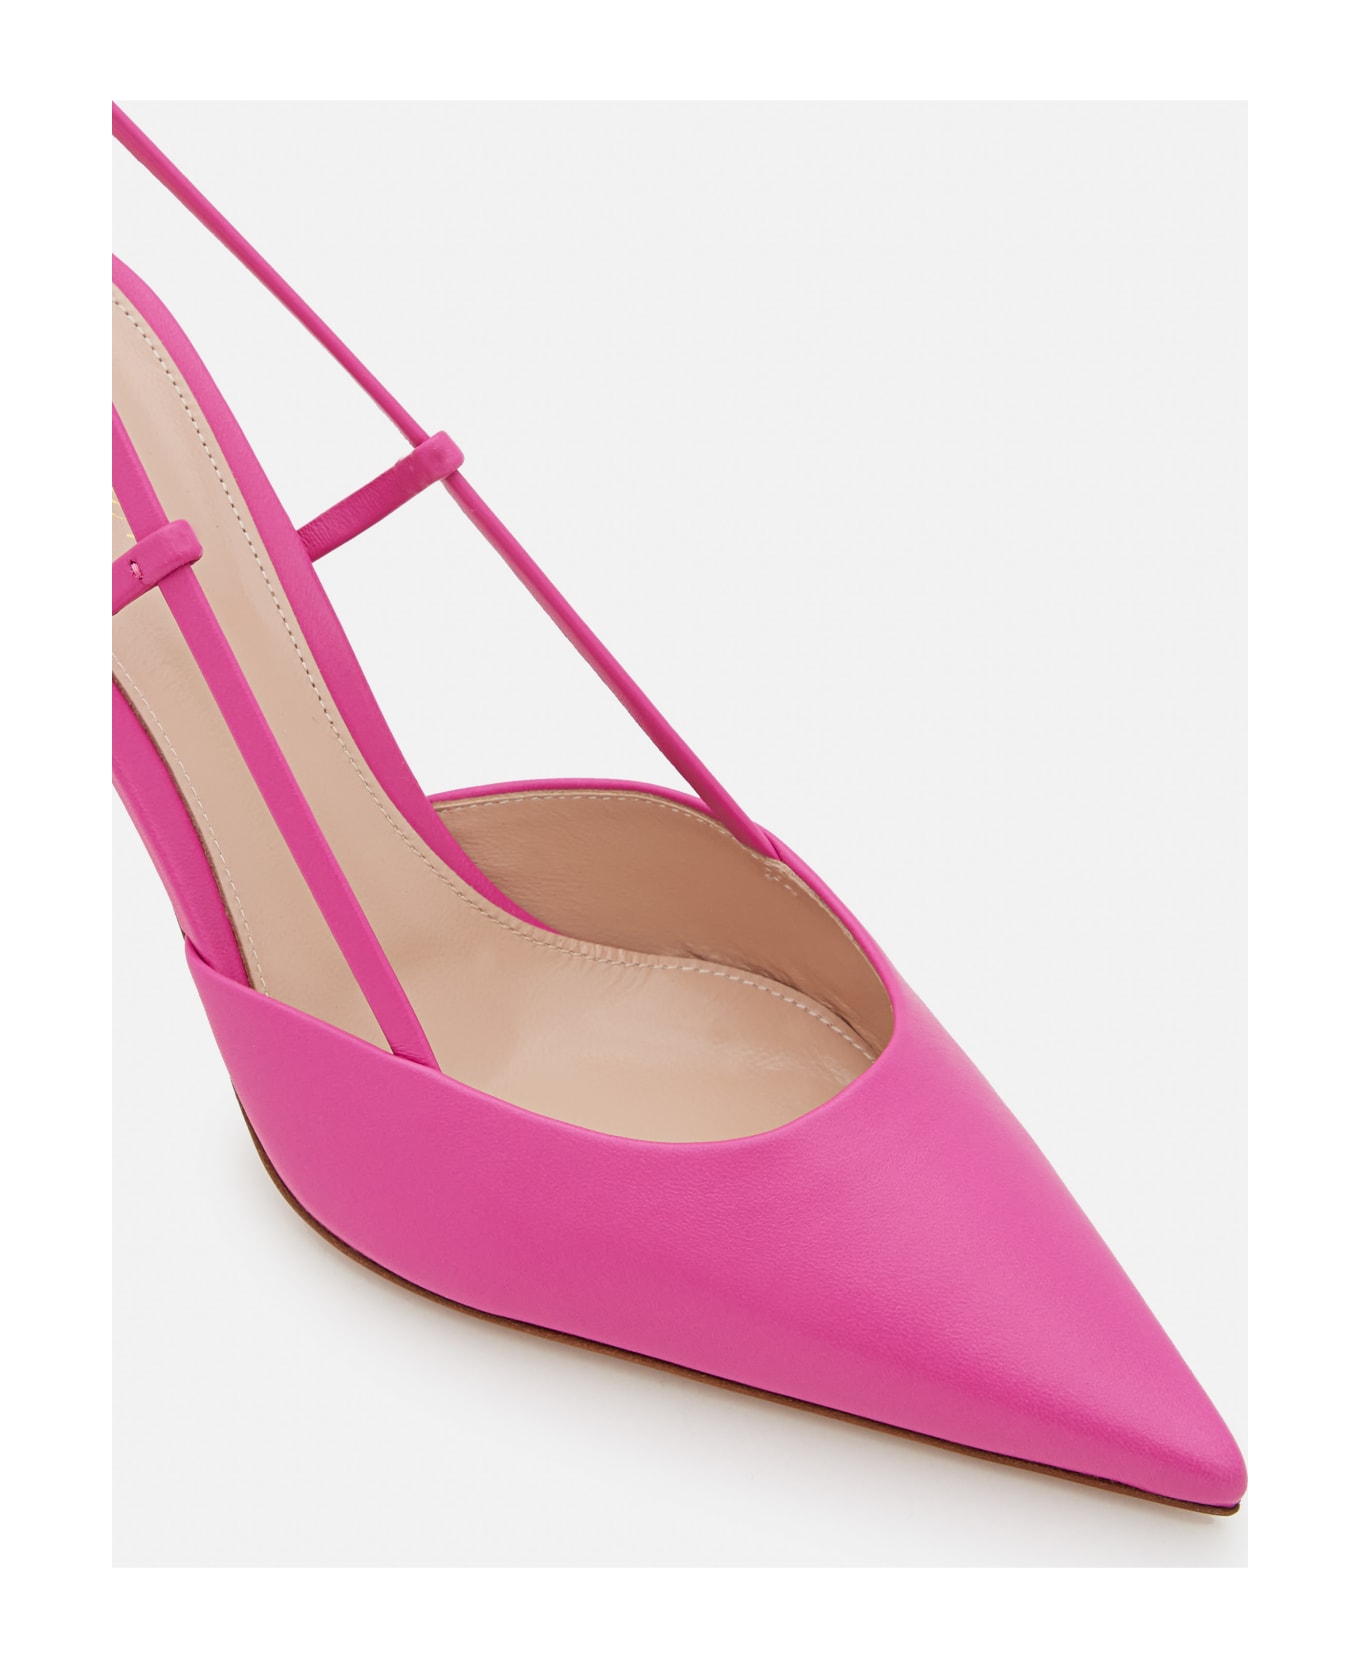 Gianvito Rossi 85mm Ascent Leather Pumps - Pink